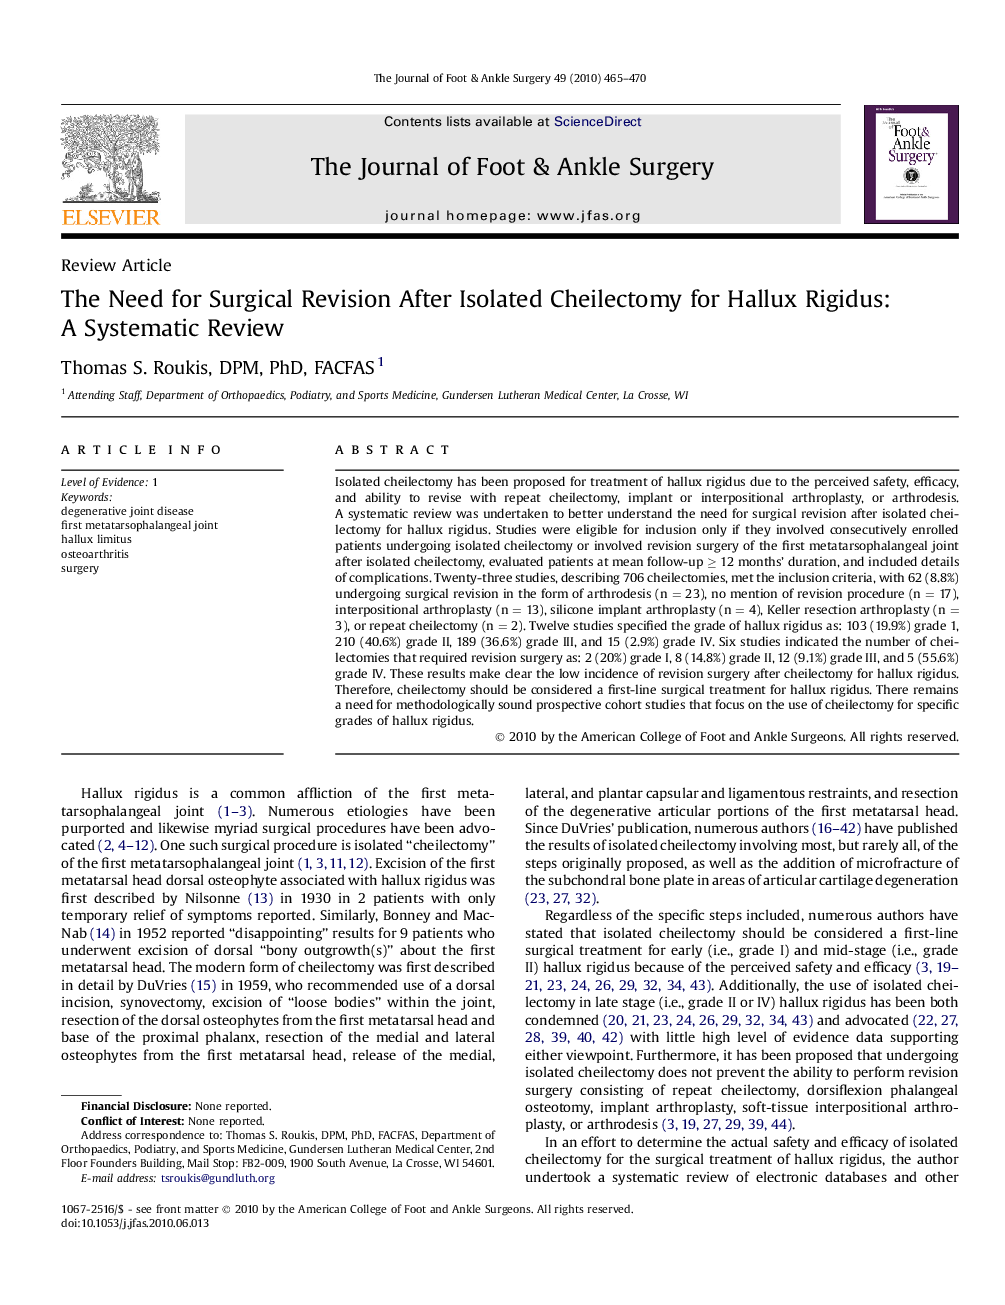 The Need for Surgical Revision After Isolated Cheilectomy for Hallux Rigidus: A Systematic Review 